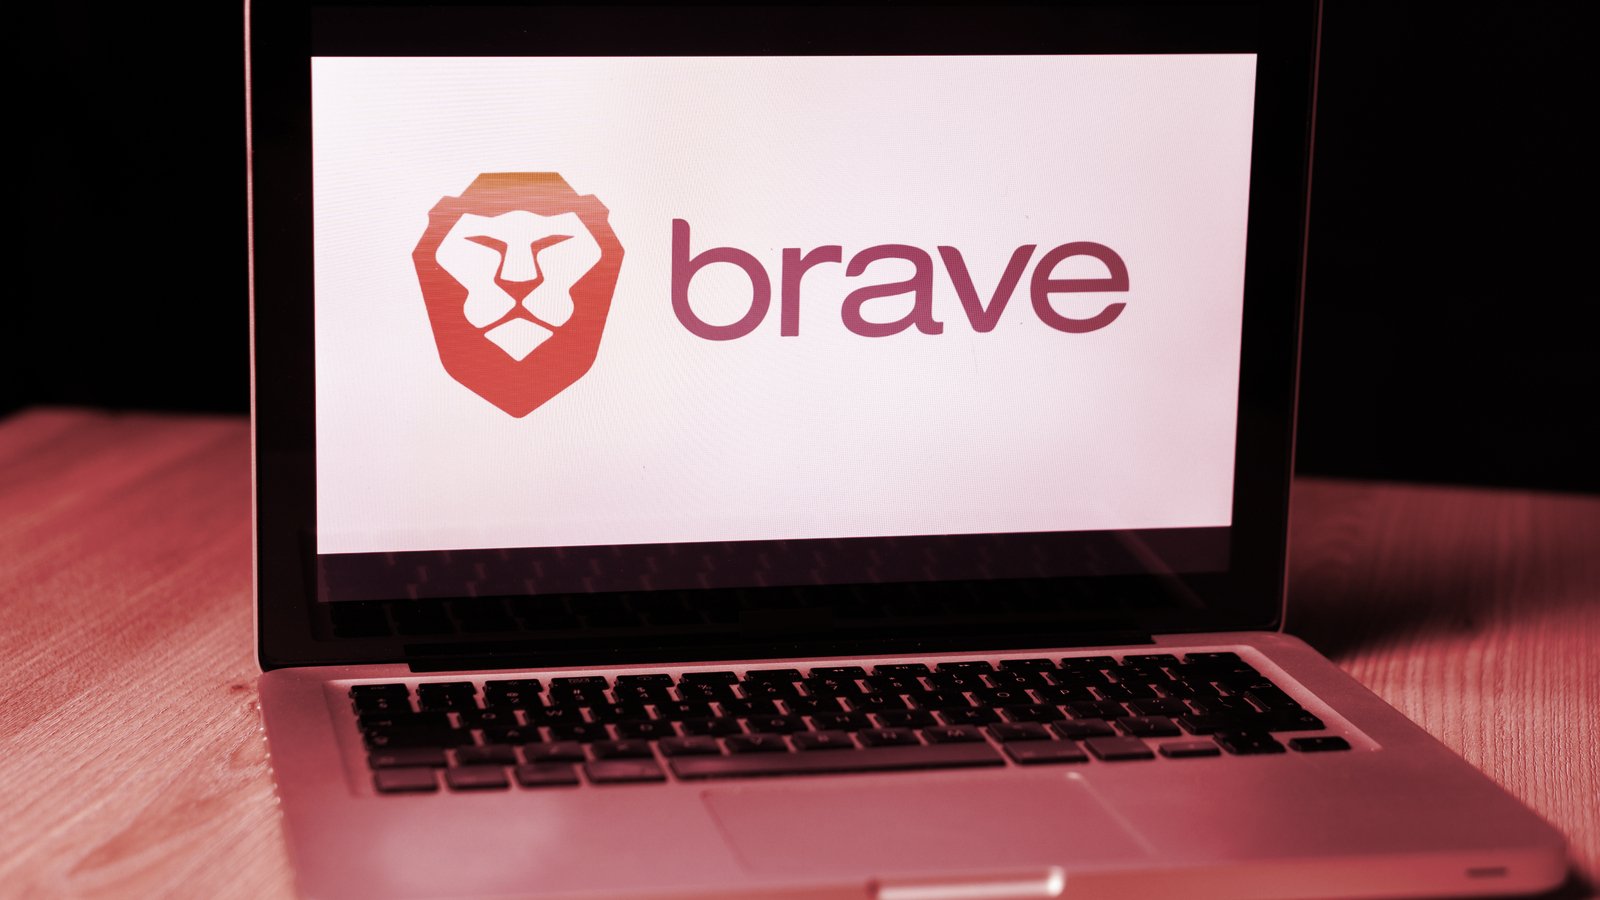 Privacy Browser Brave Expands Beyond Ethereum to Solana